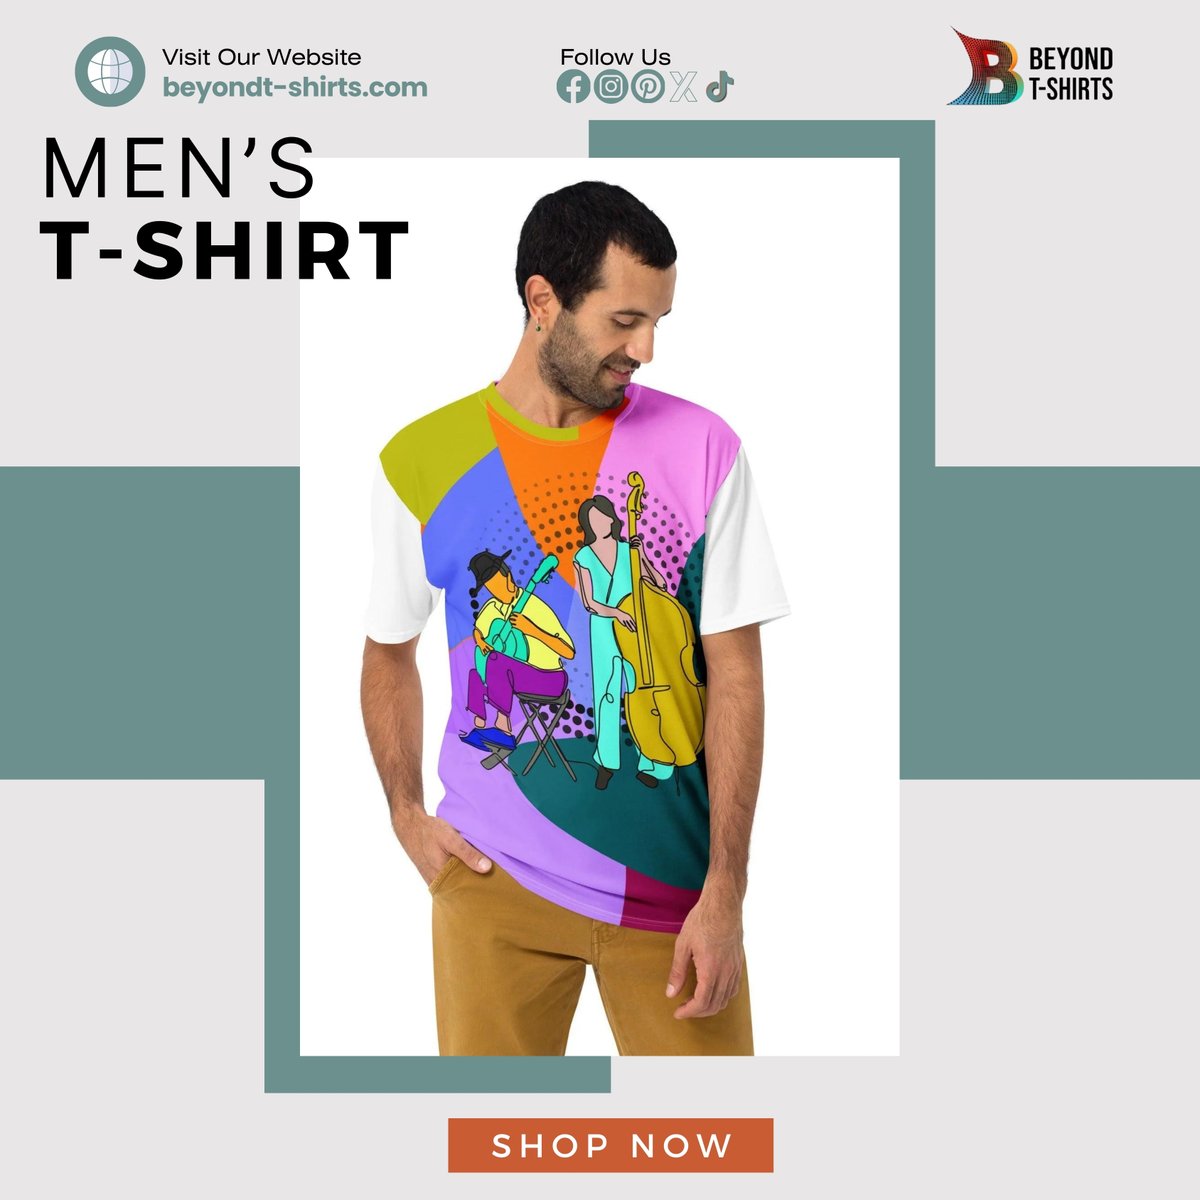 Step into summer with style! ☀️ Unless your inner artist with our vibrant, music-inspired men's T-shirts. 👕 From casual jam sessions to everyday fashion, our tees hit the right note. #tshirt #fashion #ootd #style #outfitoftheday #instafashion #tshirtlover #tshirtdesign